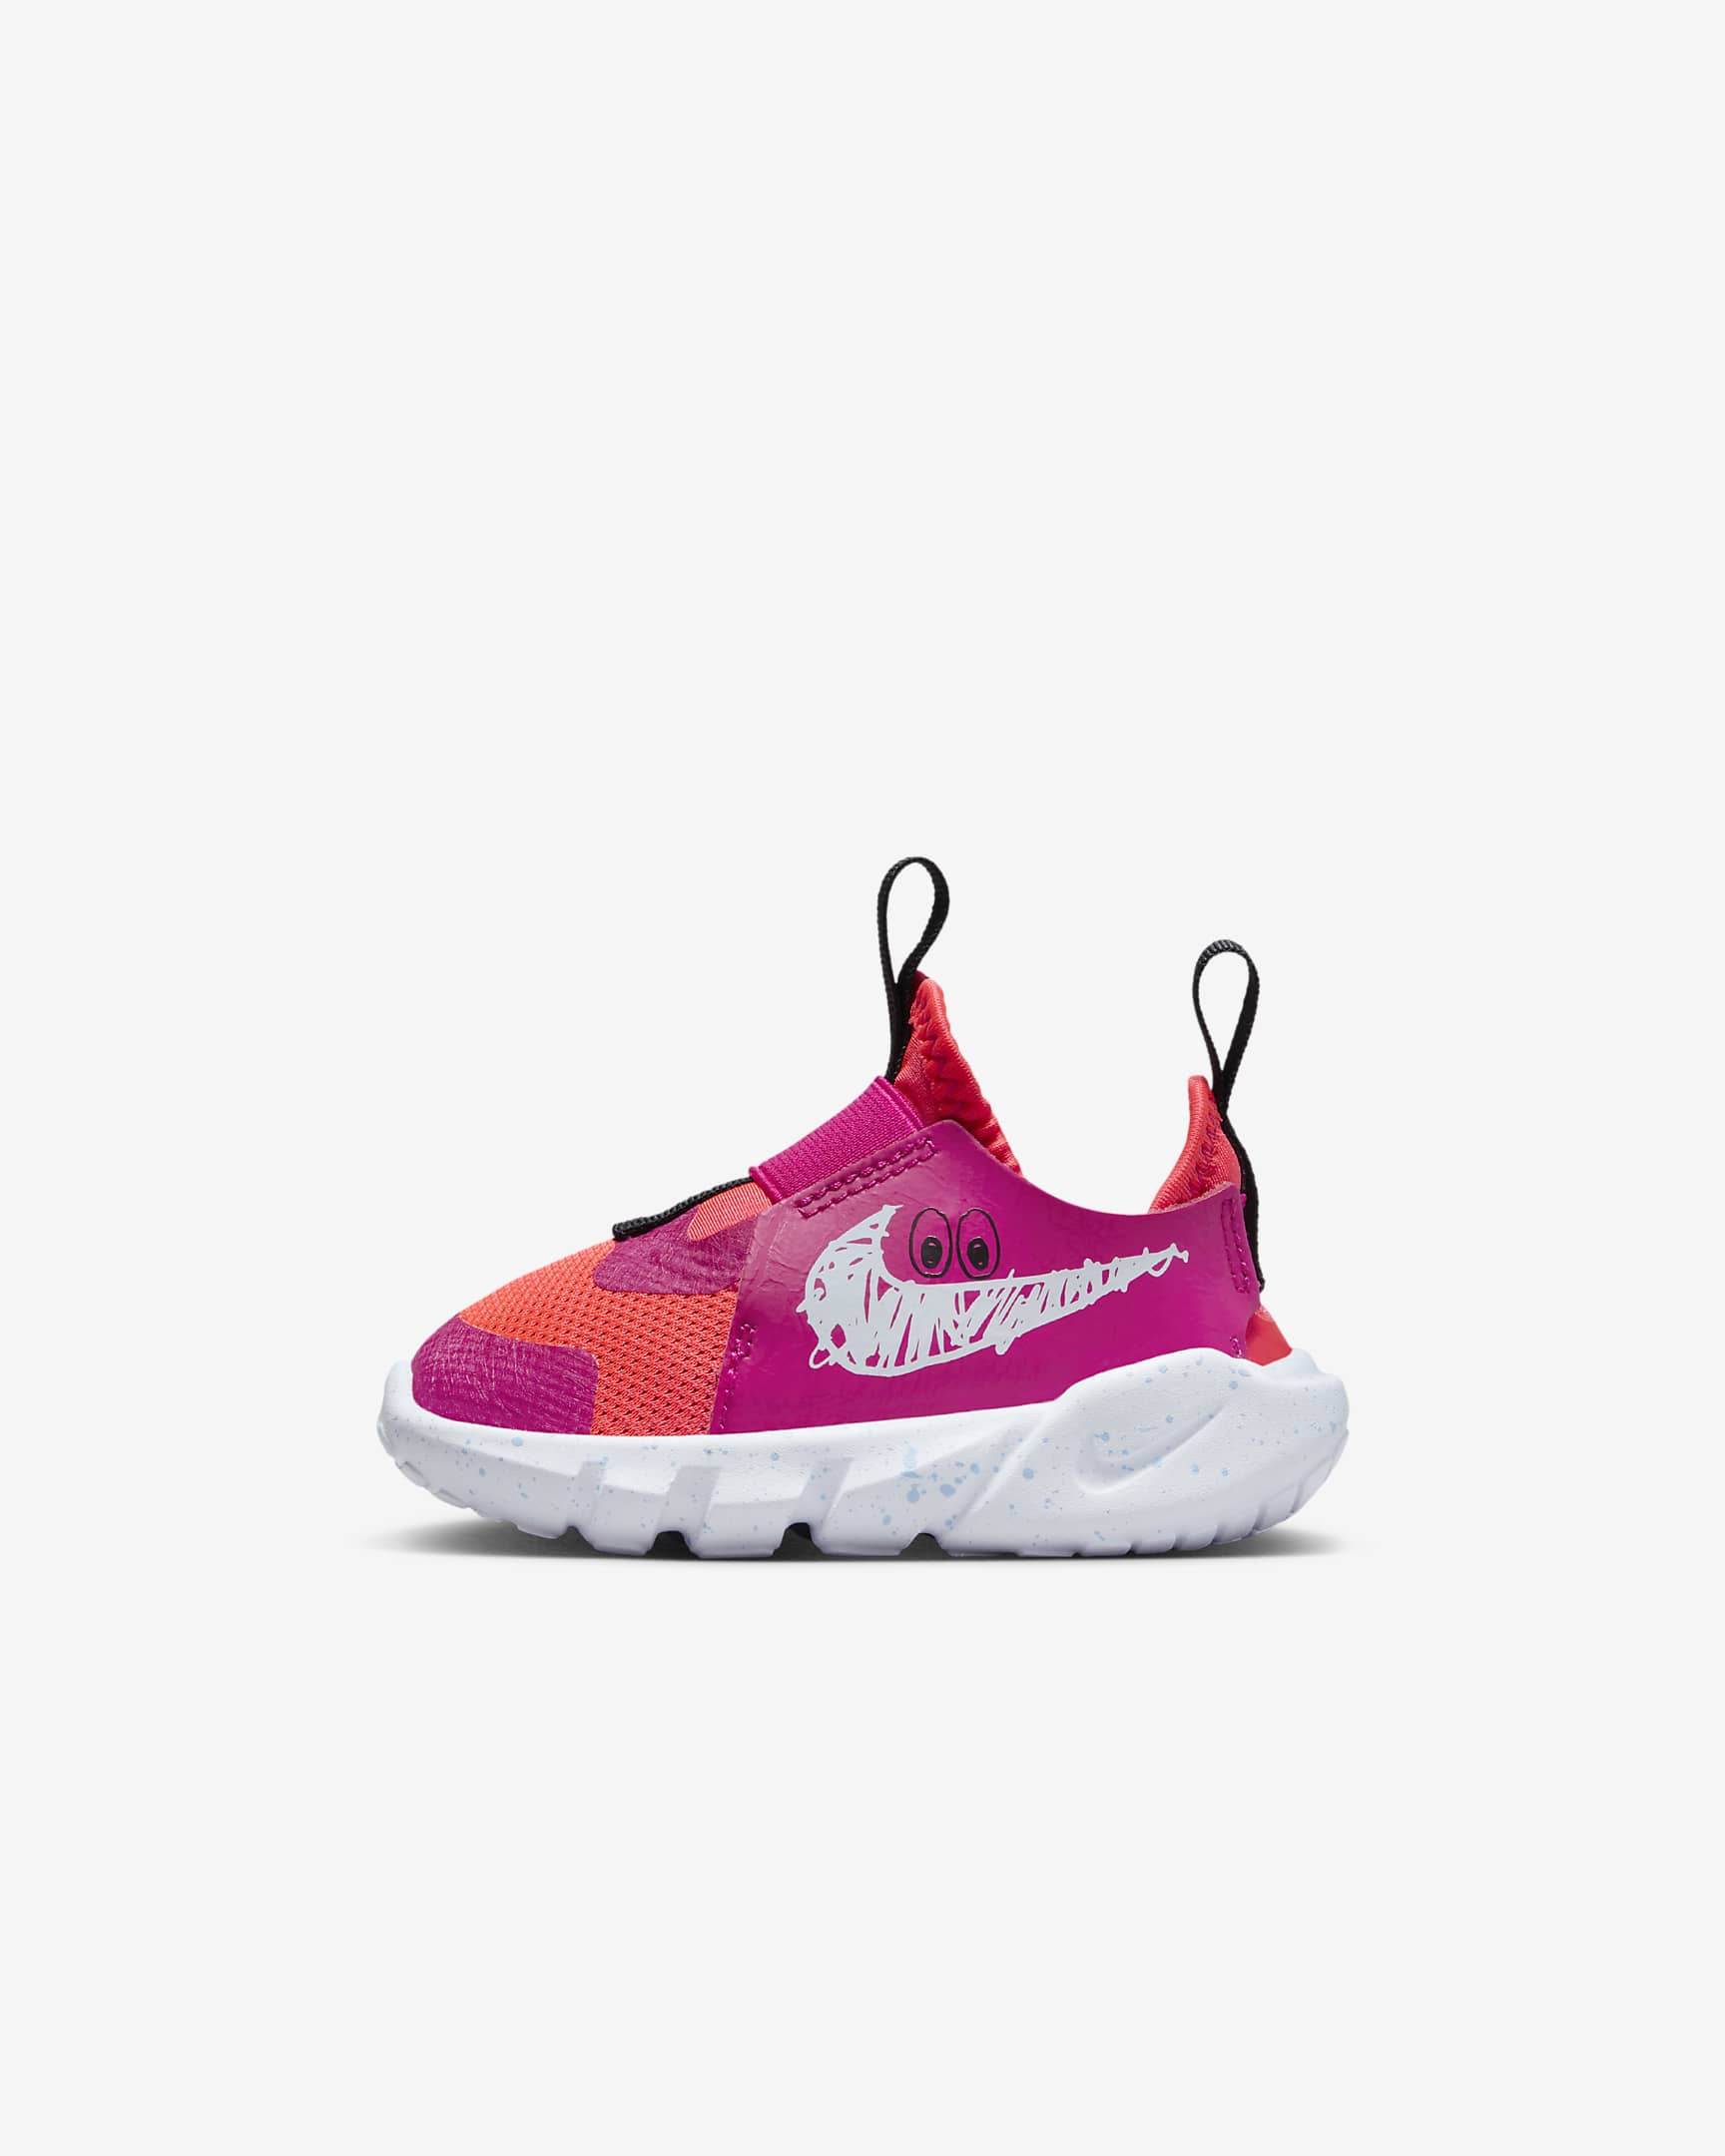 Nike Flex Runner 2 Baby/Toddler Shoes. Nike IL